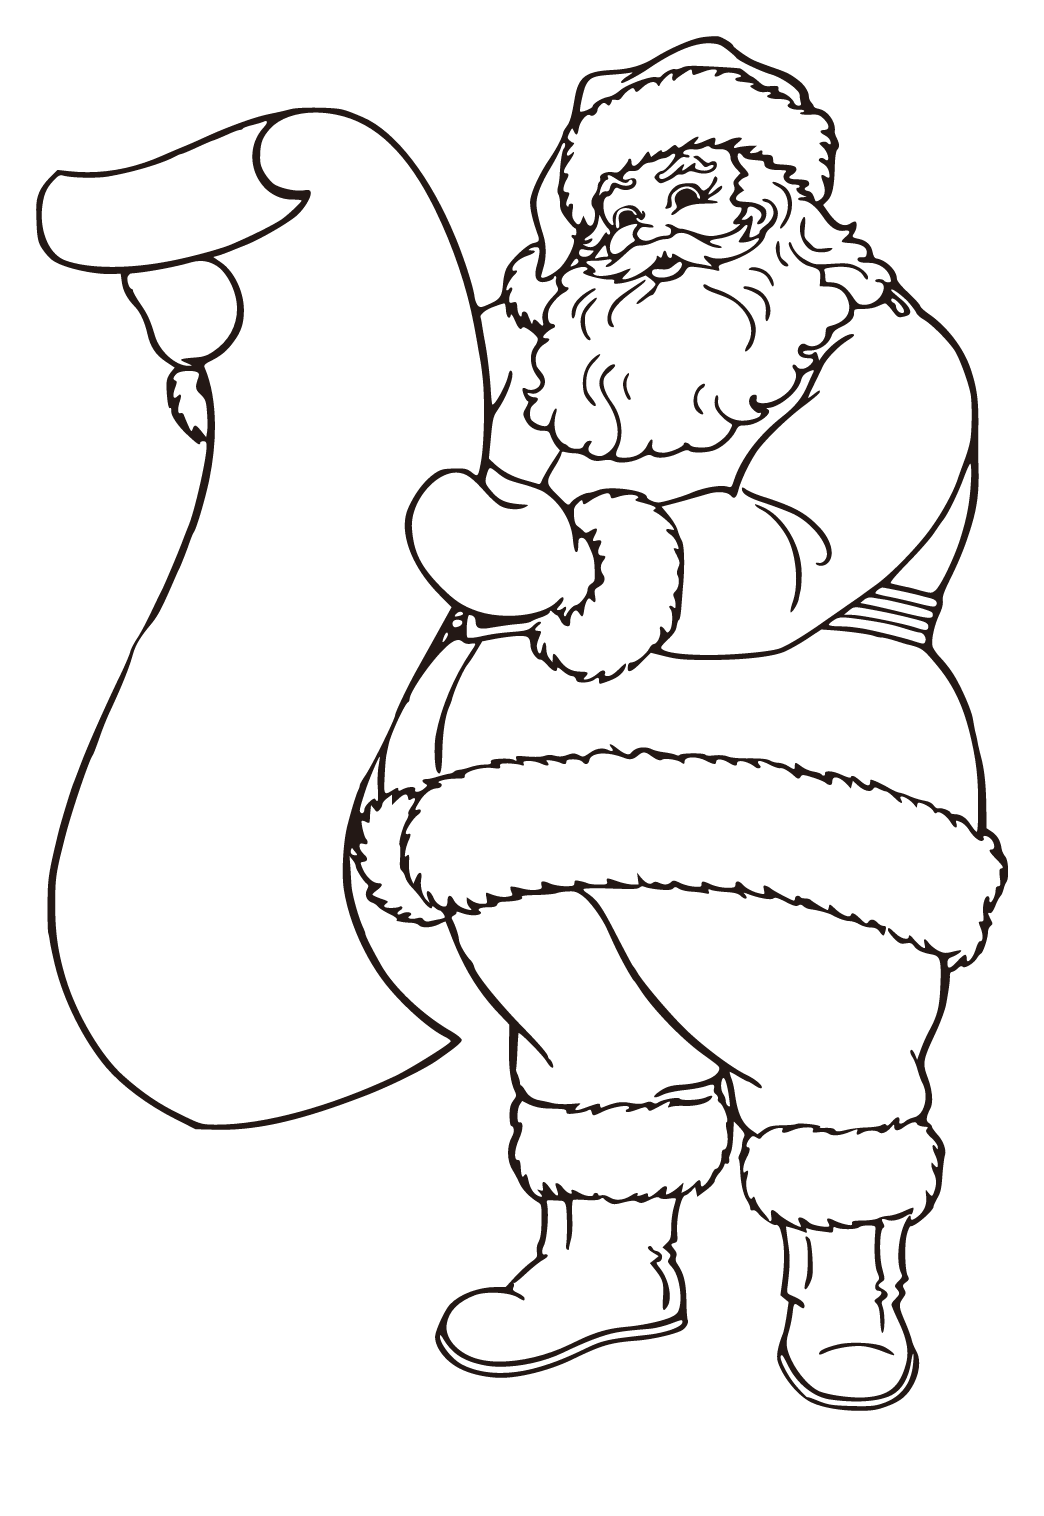 Coloring pages for christmas | coloring pages for kids, coloring 